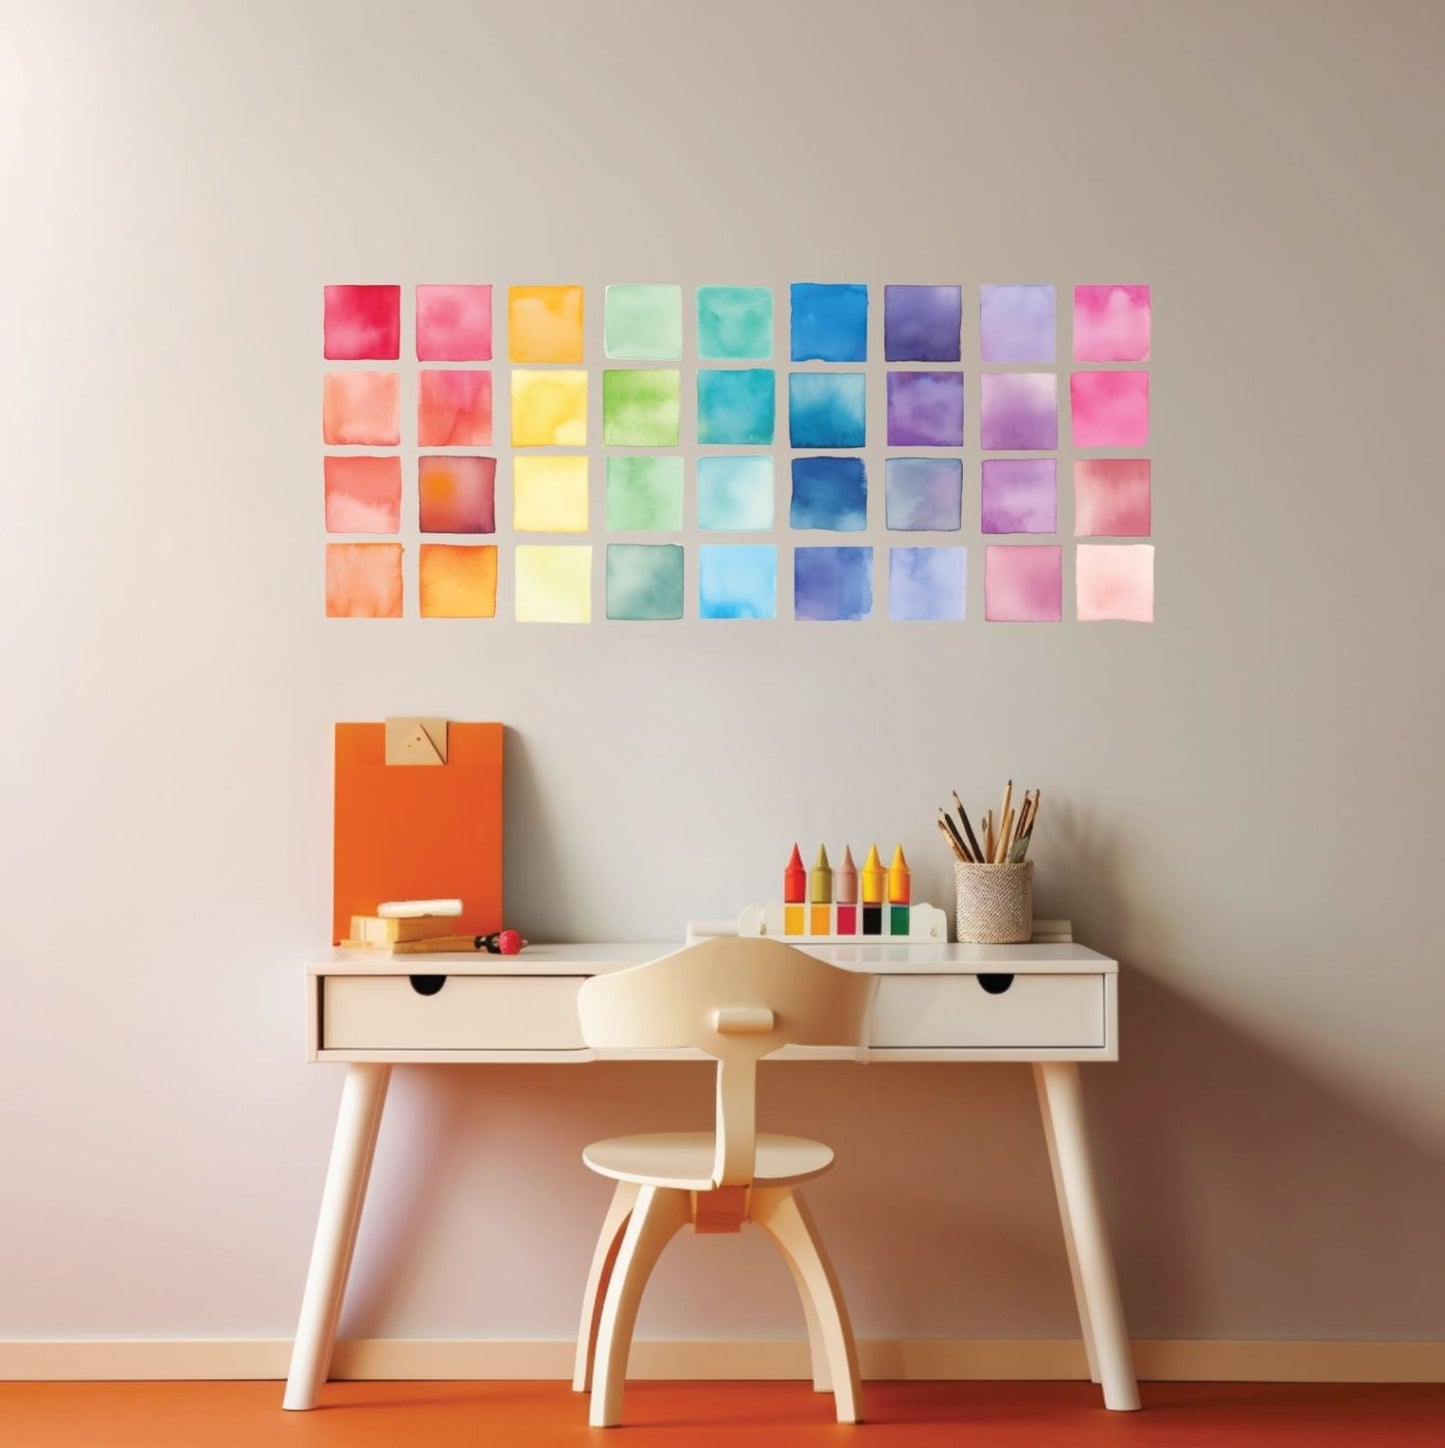 Painted Squares Wall Decals | Colorful Rainbow Watercolor Square Wall Stickers - Home Decor Decals - Picture Perfect Decals